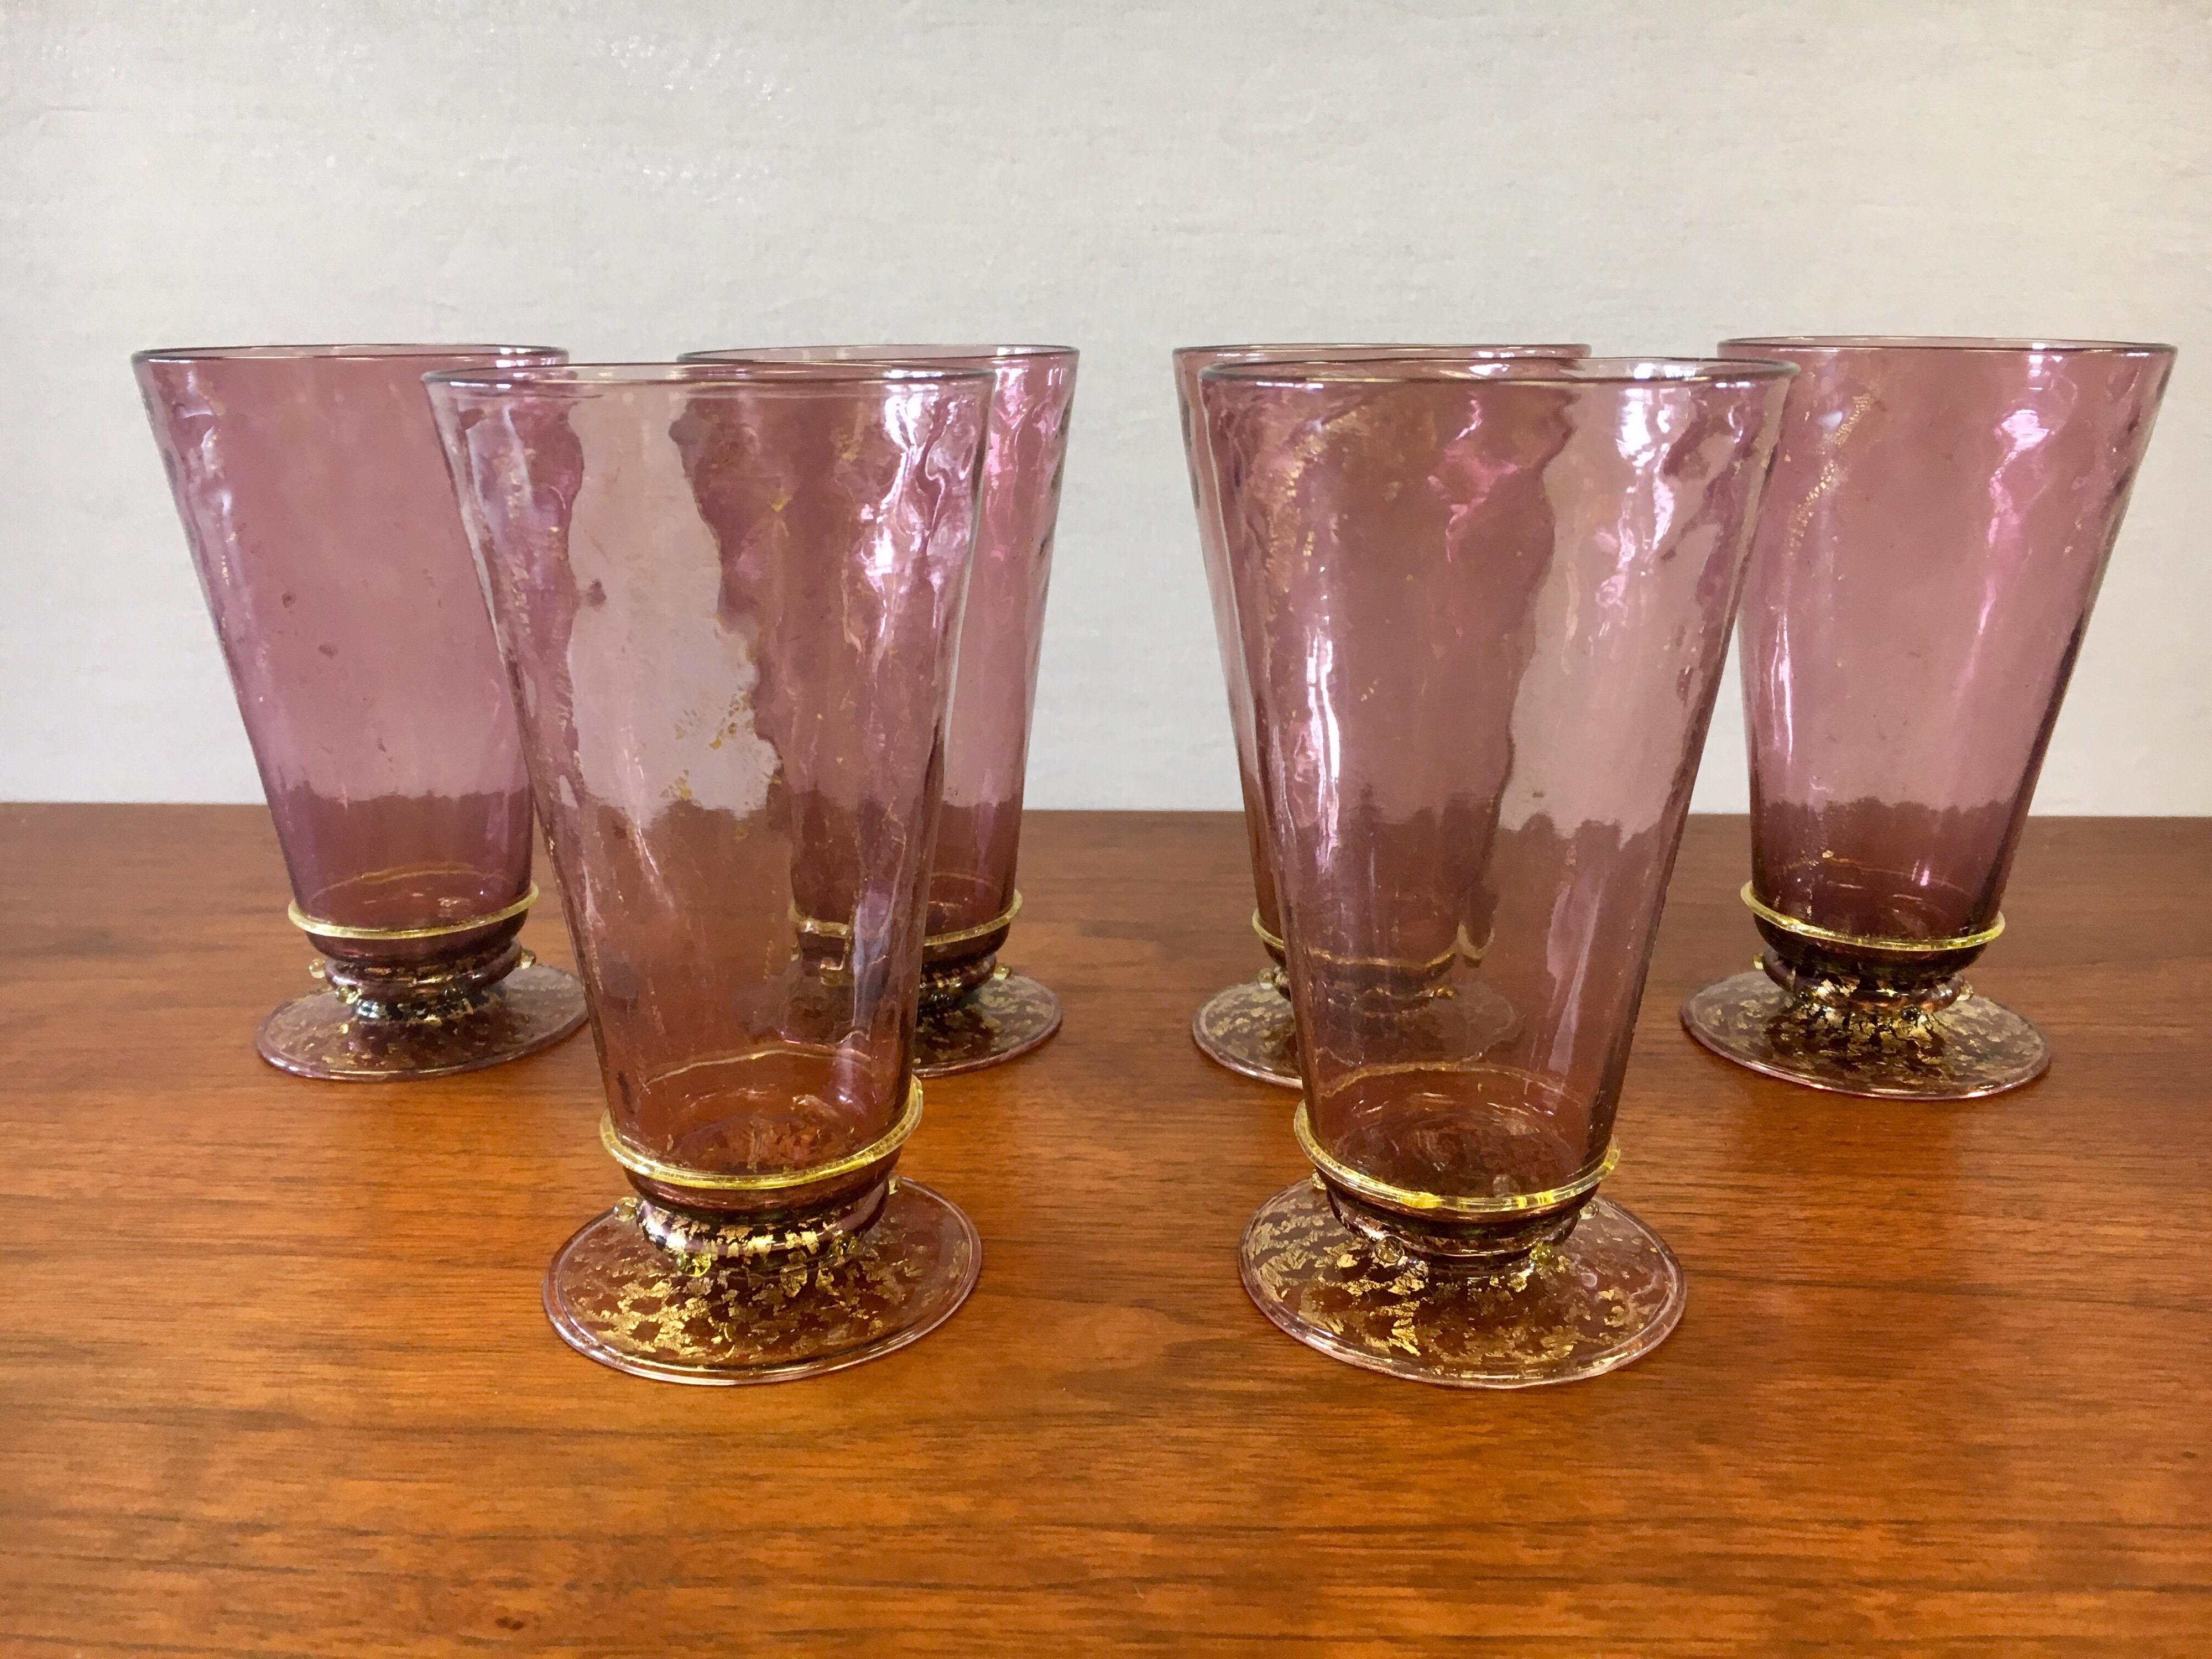 Set of six hand blown Venetian water glasses by Salviati, circa 1920s.The color is soft purple or amethyst with gold leaf which works great with pastel palette.